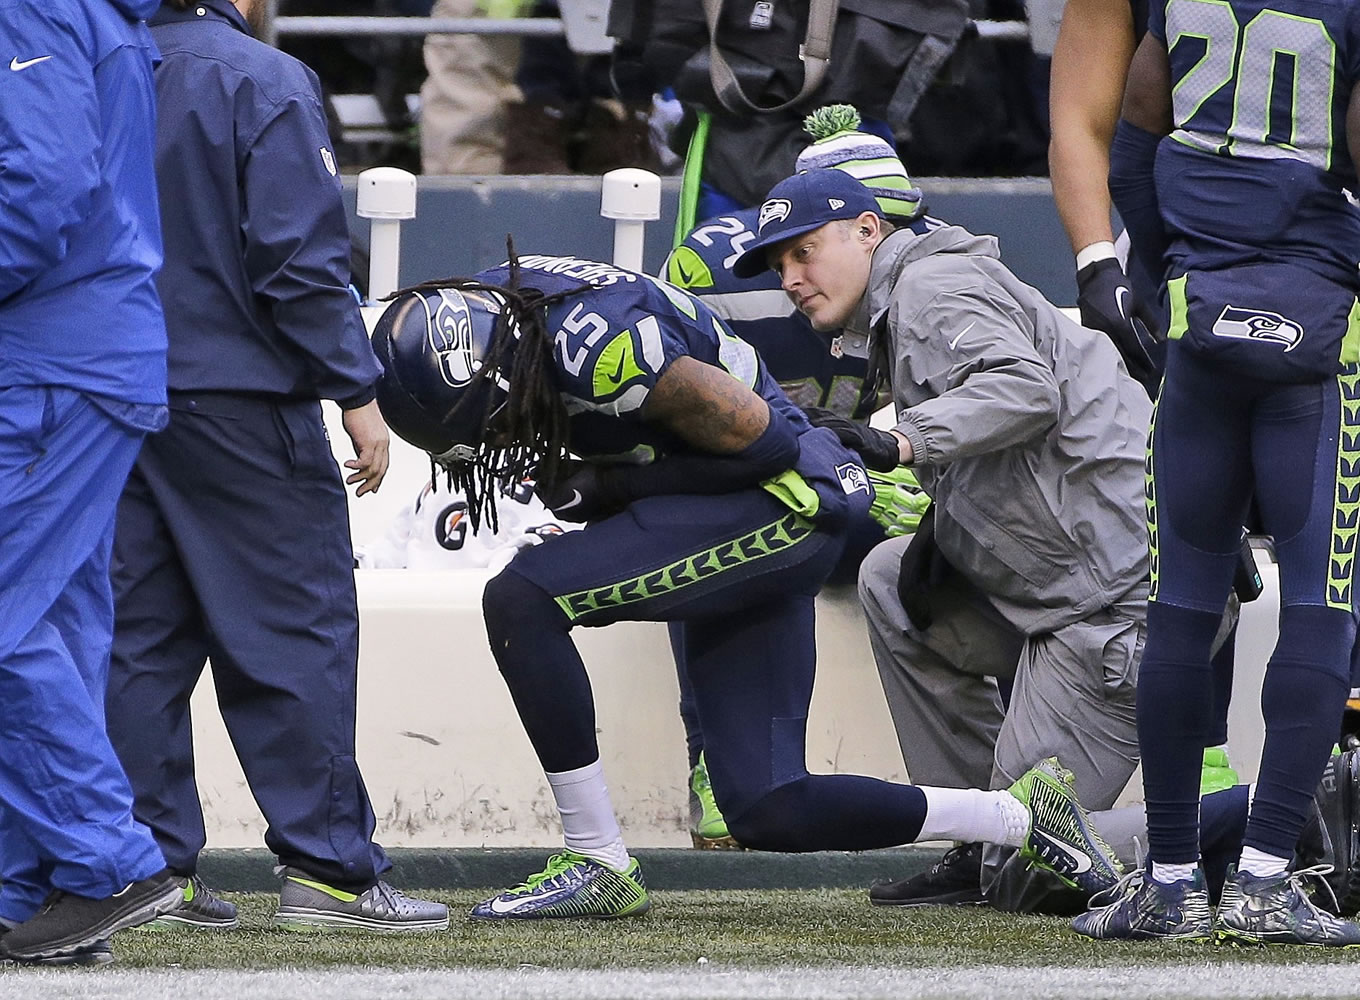 Seattle Seahawks' Richard Sherman appears hurt after a play during the second half of the NFL football NFC Championship game against the Green Bay Packers Sunday in Seattle.